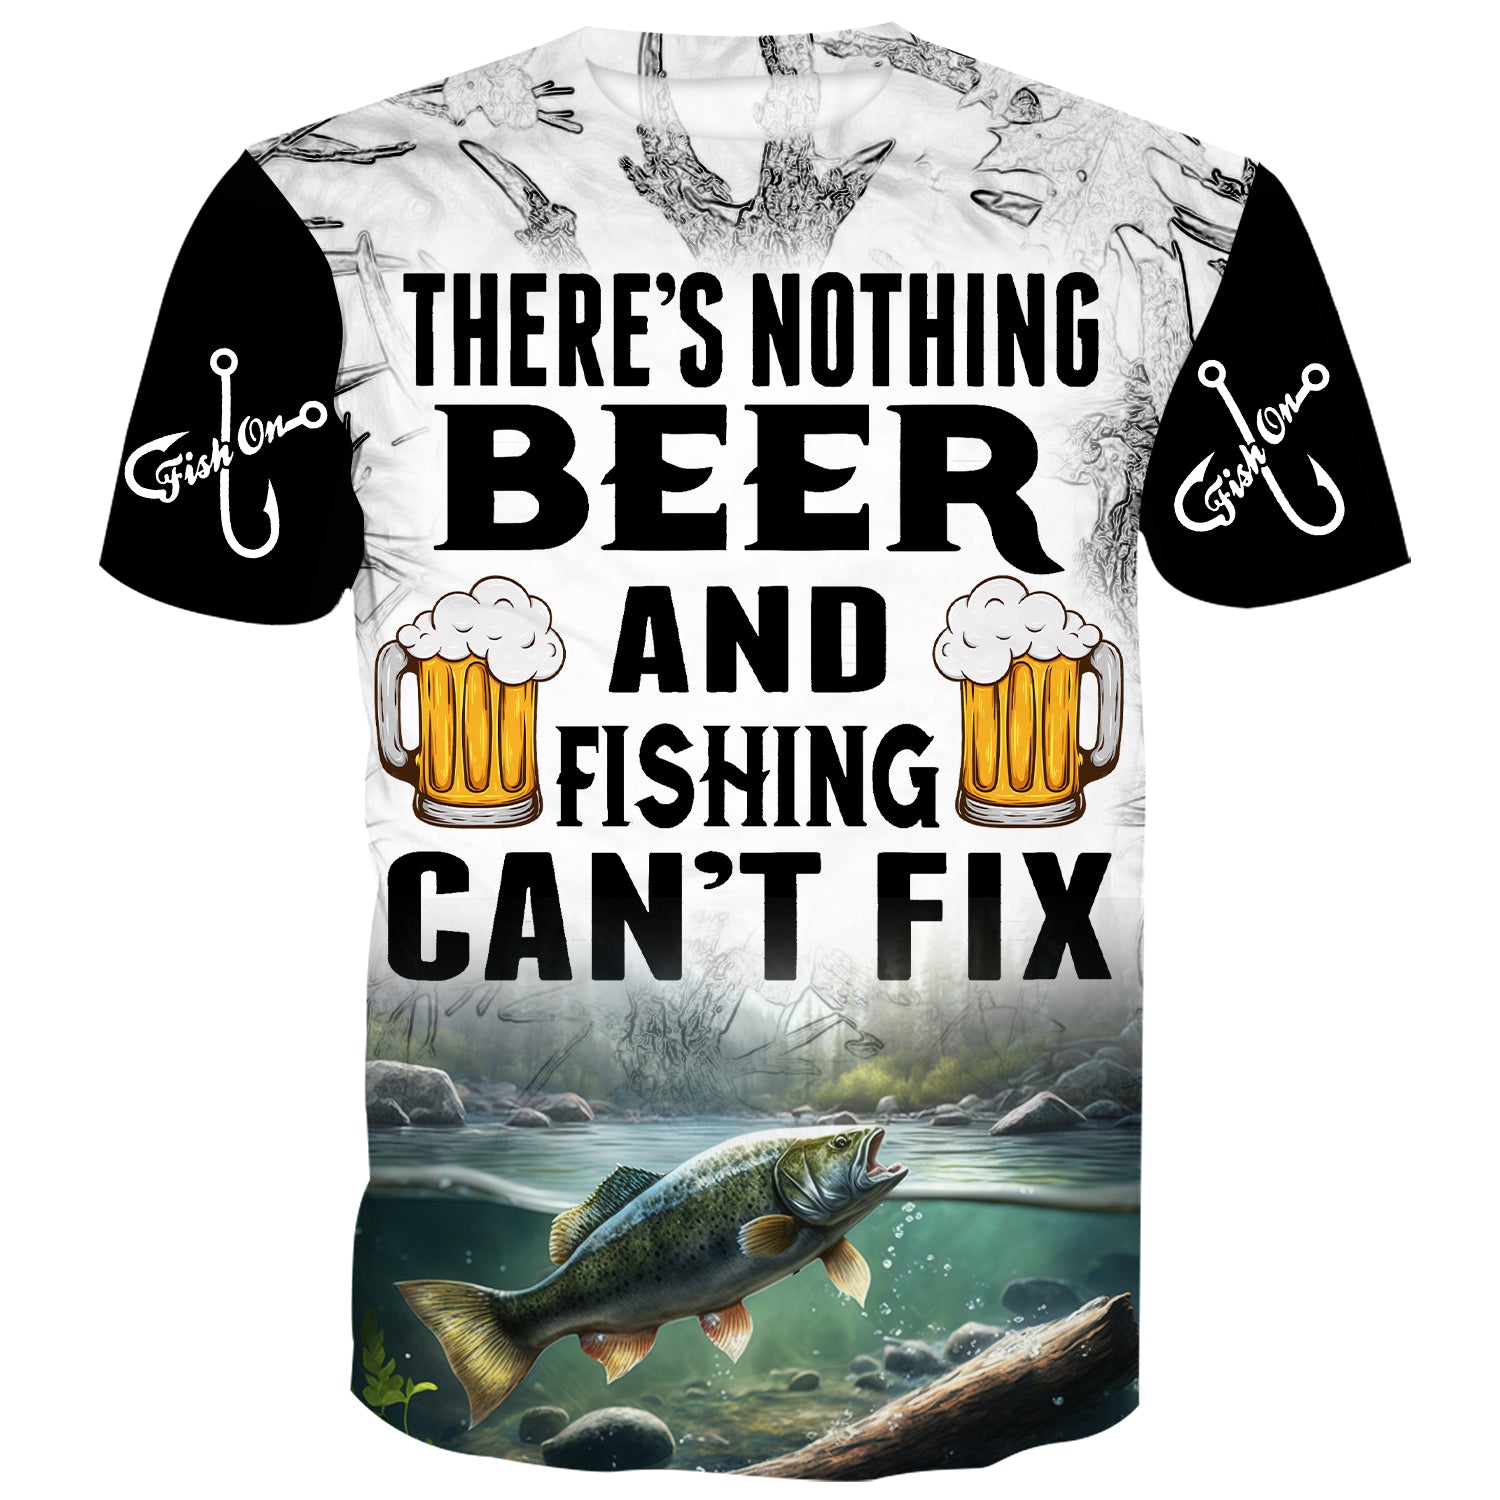 There's nothing beer and fishing can't fix - Bass T-Shirt